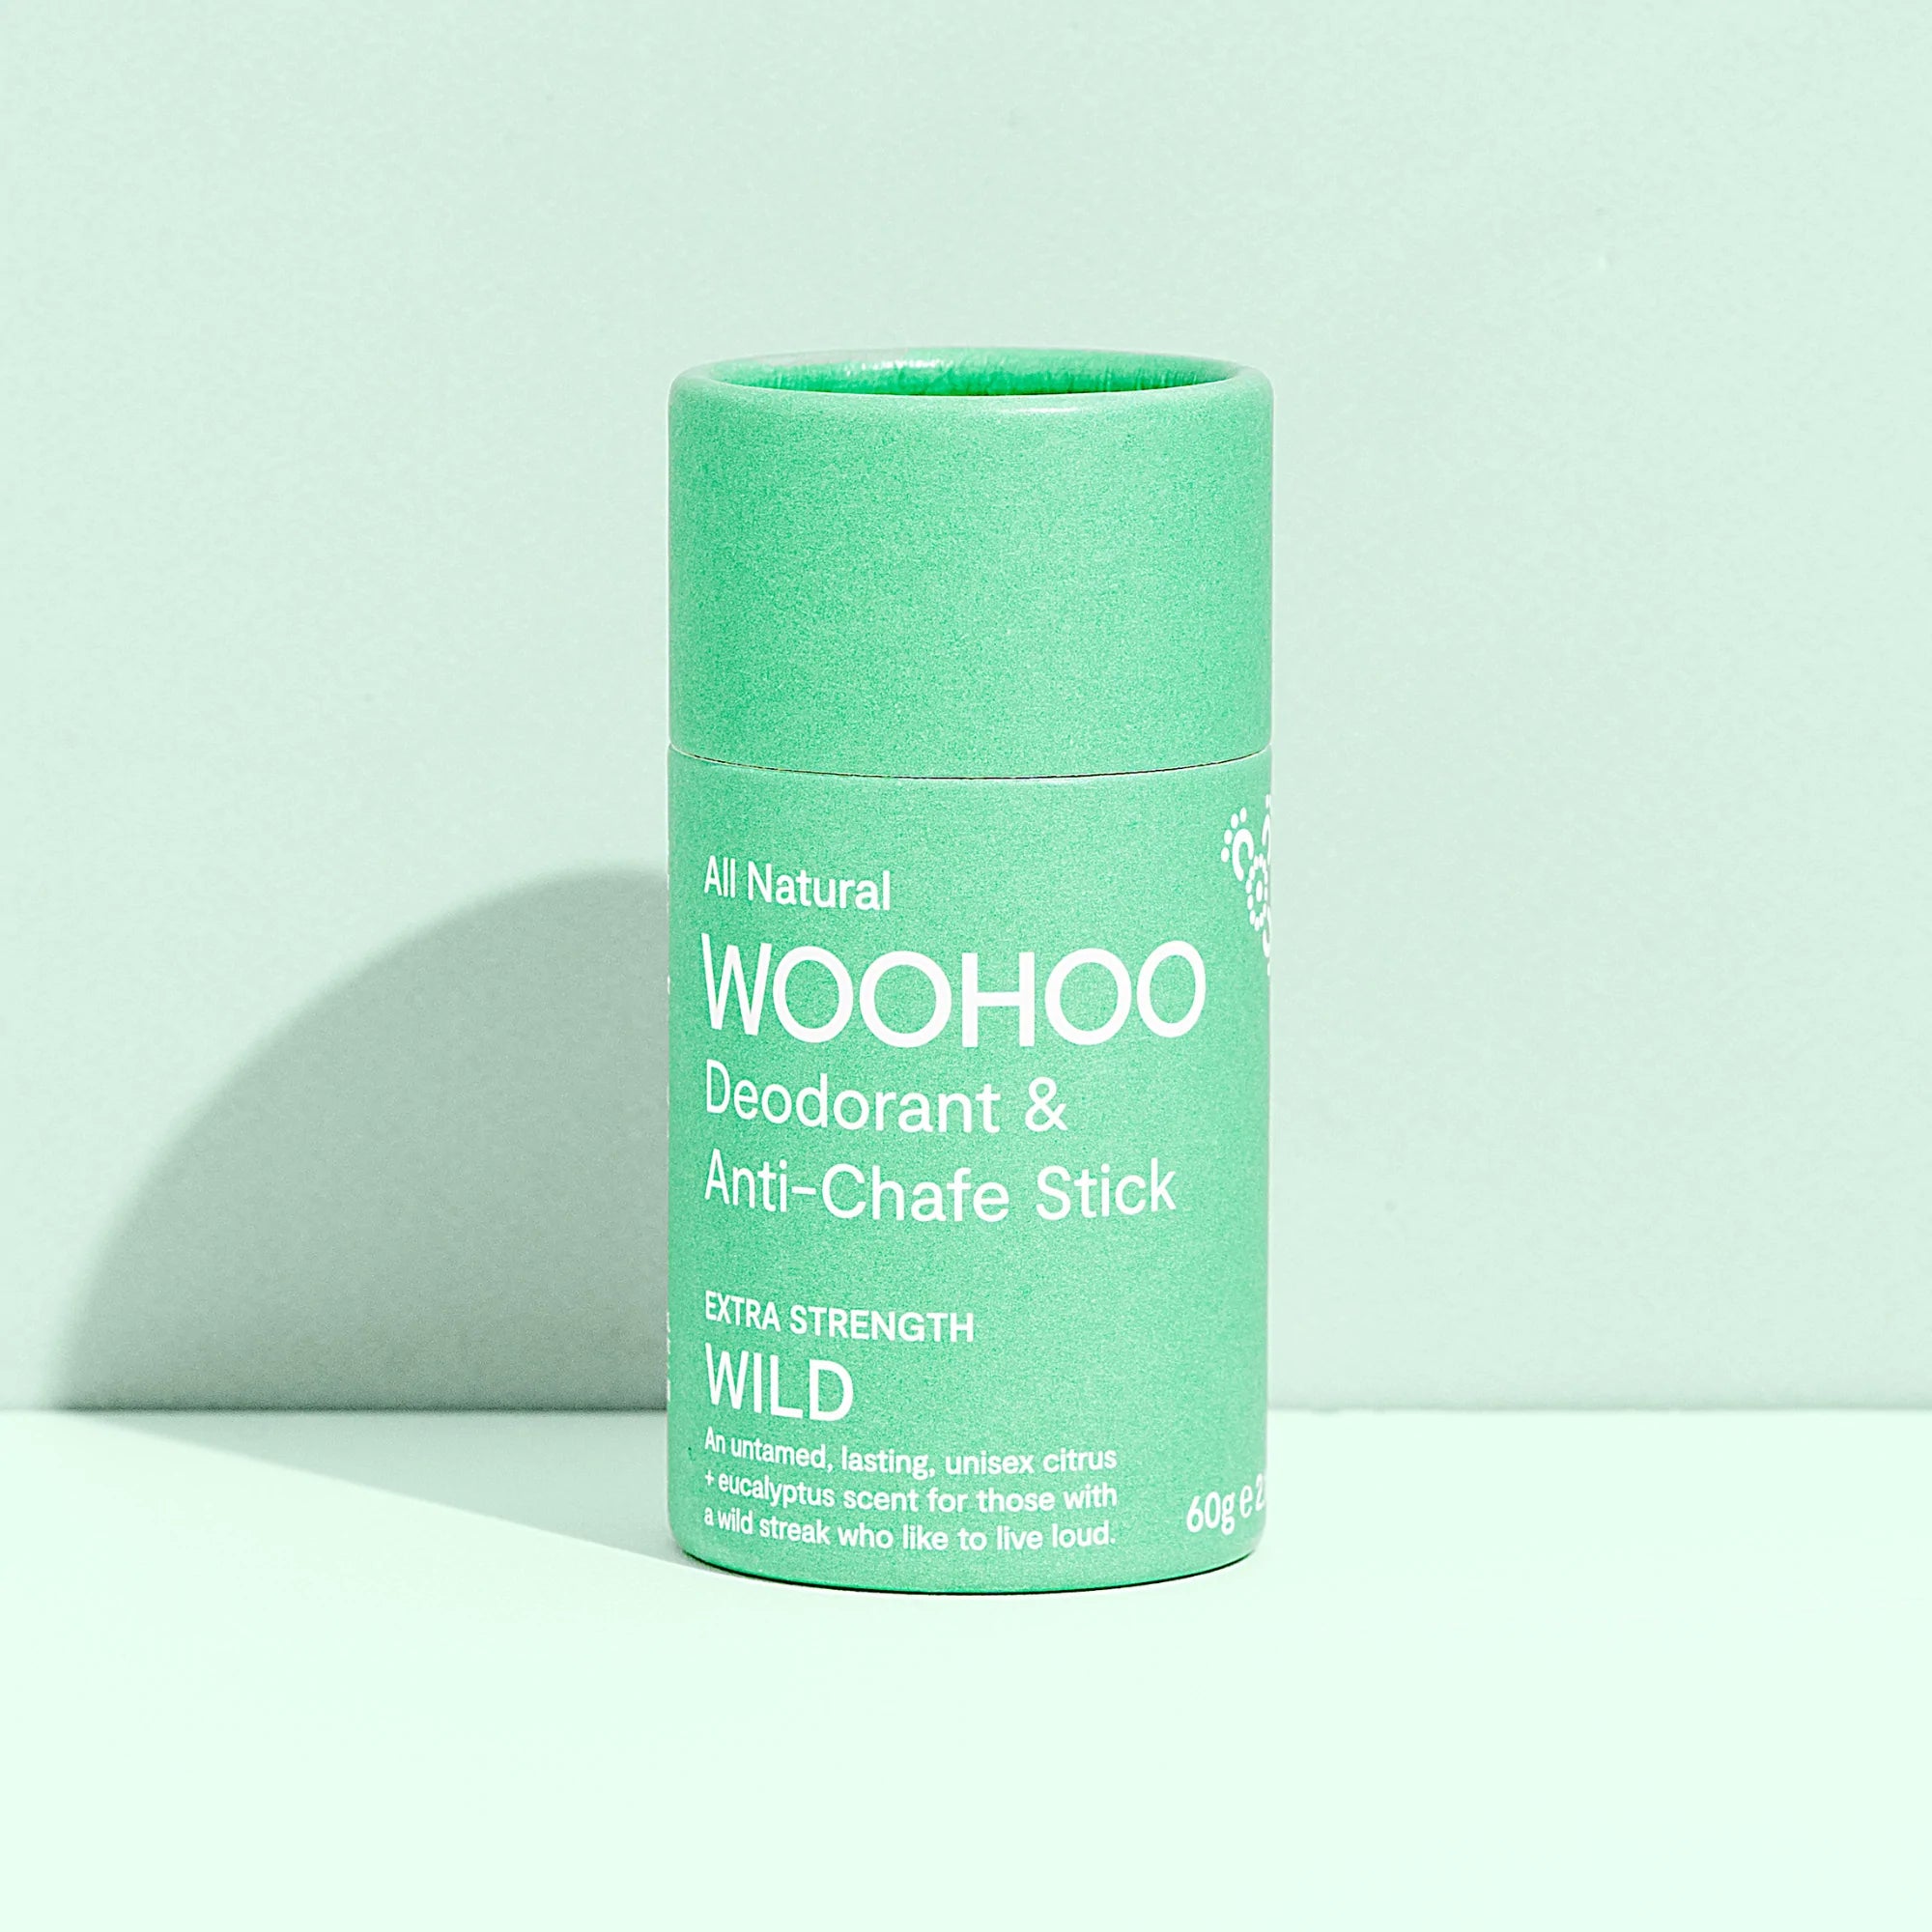 Image of Wild Natural Deodorant Stick on a light green background